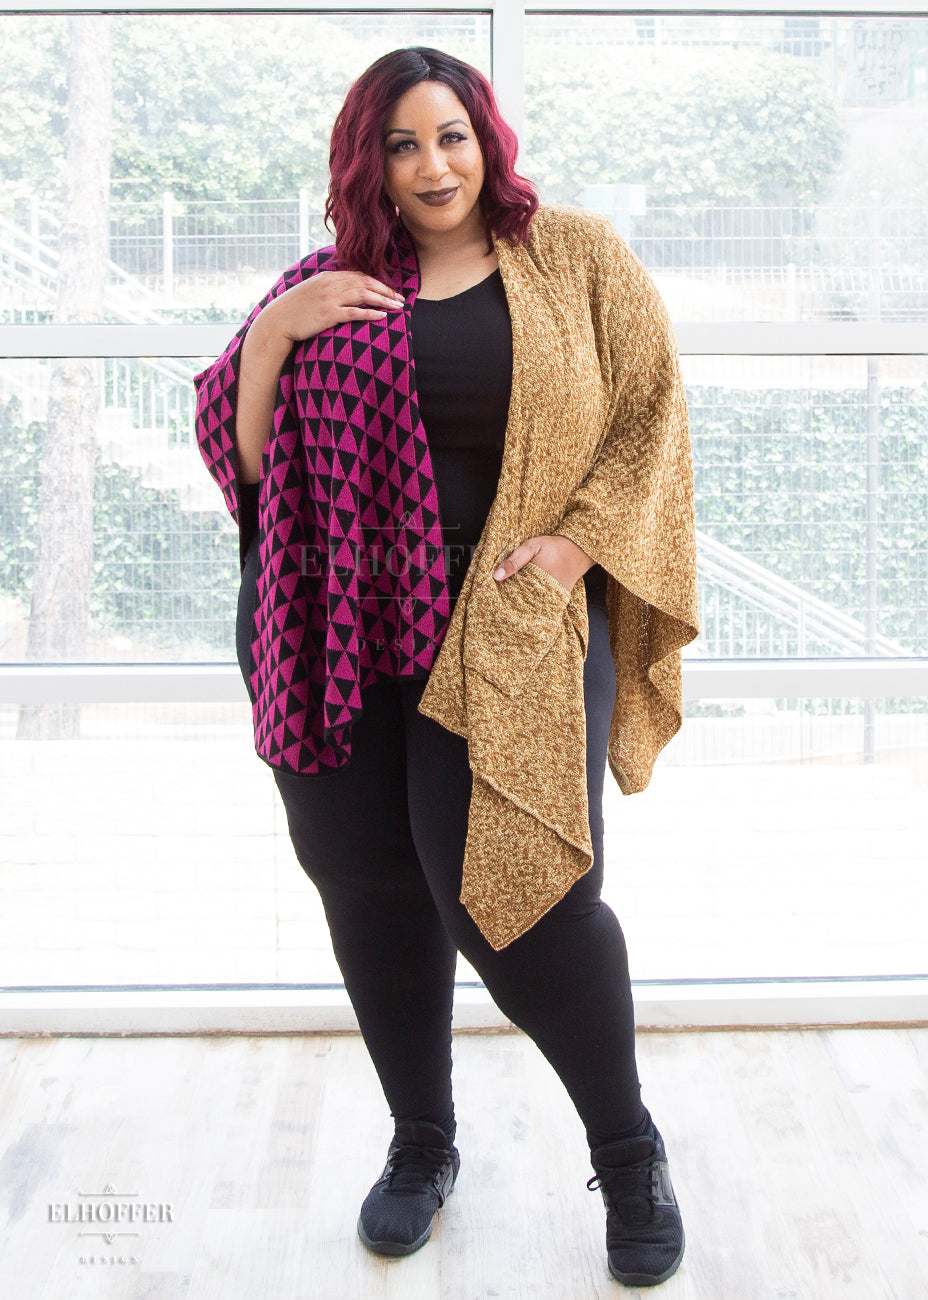 Dawn, a dark haired medium skinned size 3X model, wears the pink, black, and golden mustard poncho. She pairs it with a black top, black leggings, and black sneakers.